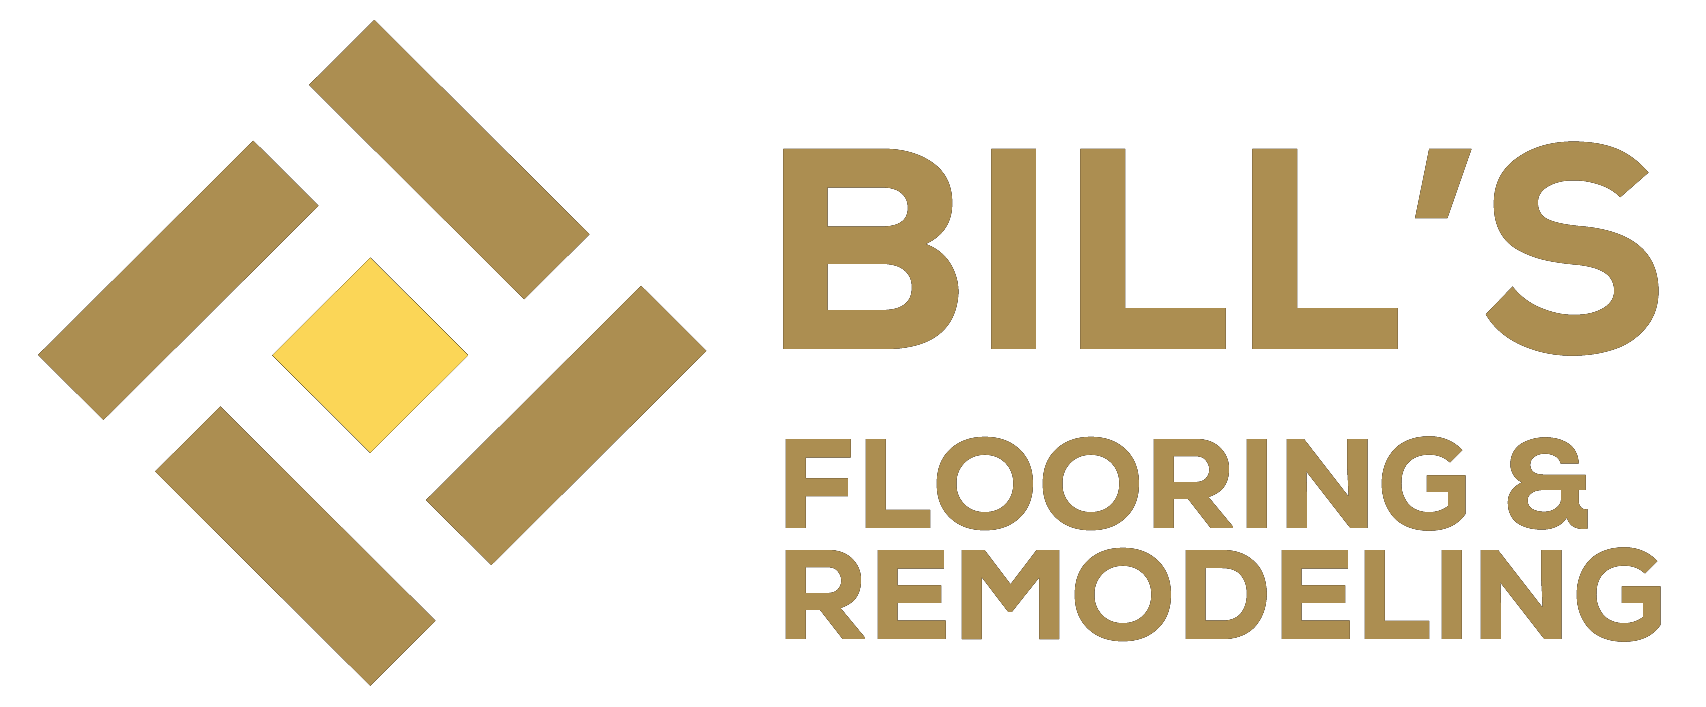 Bill’s Flooring and Remodeling